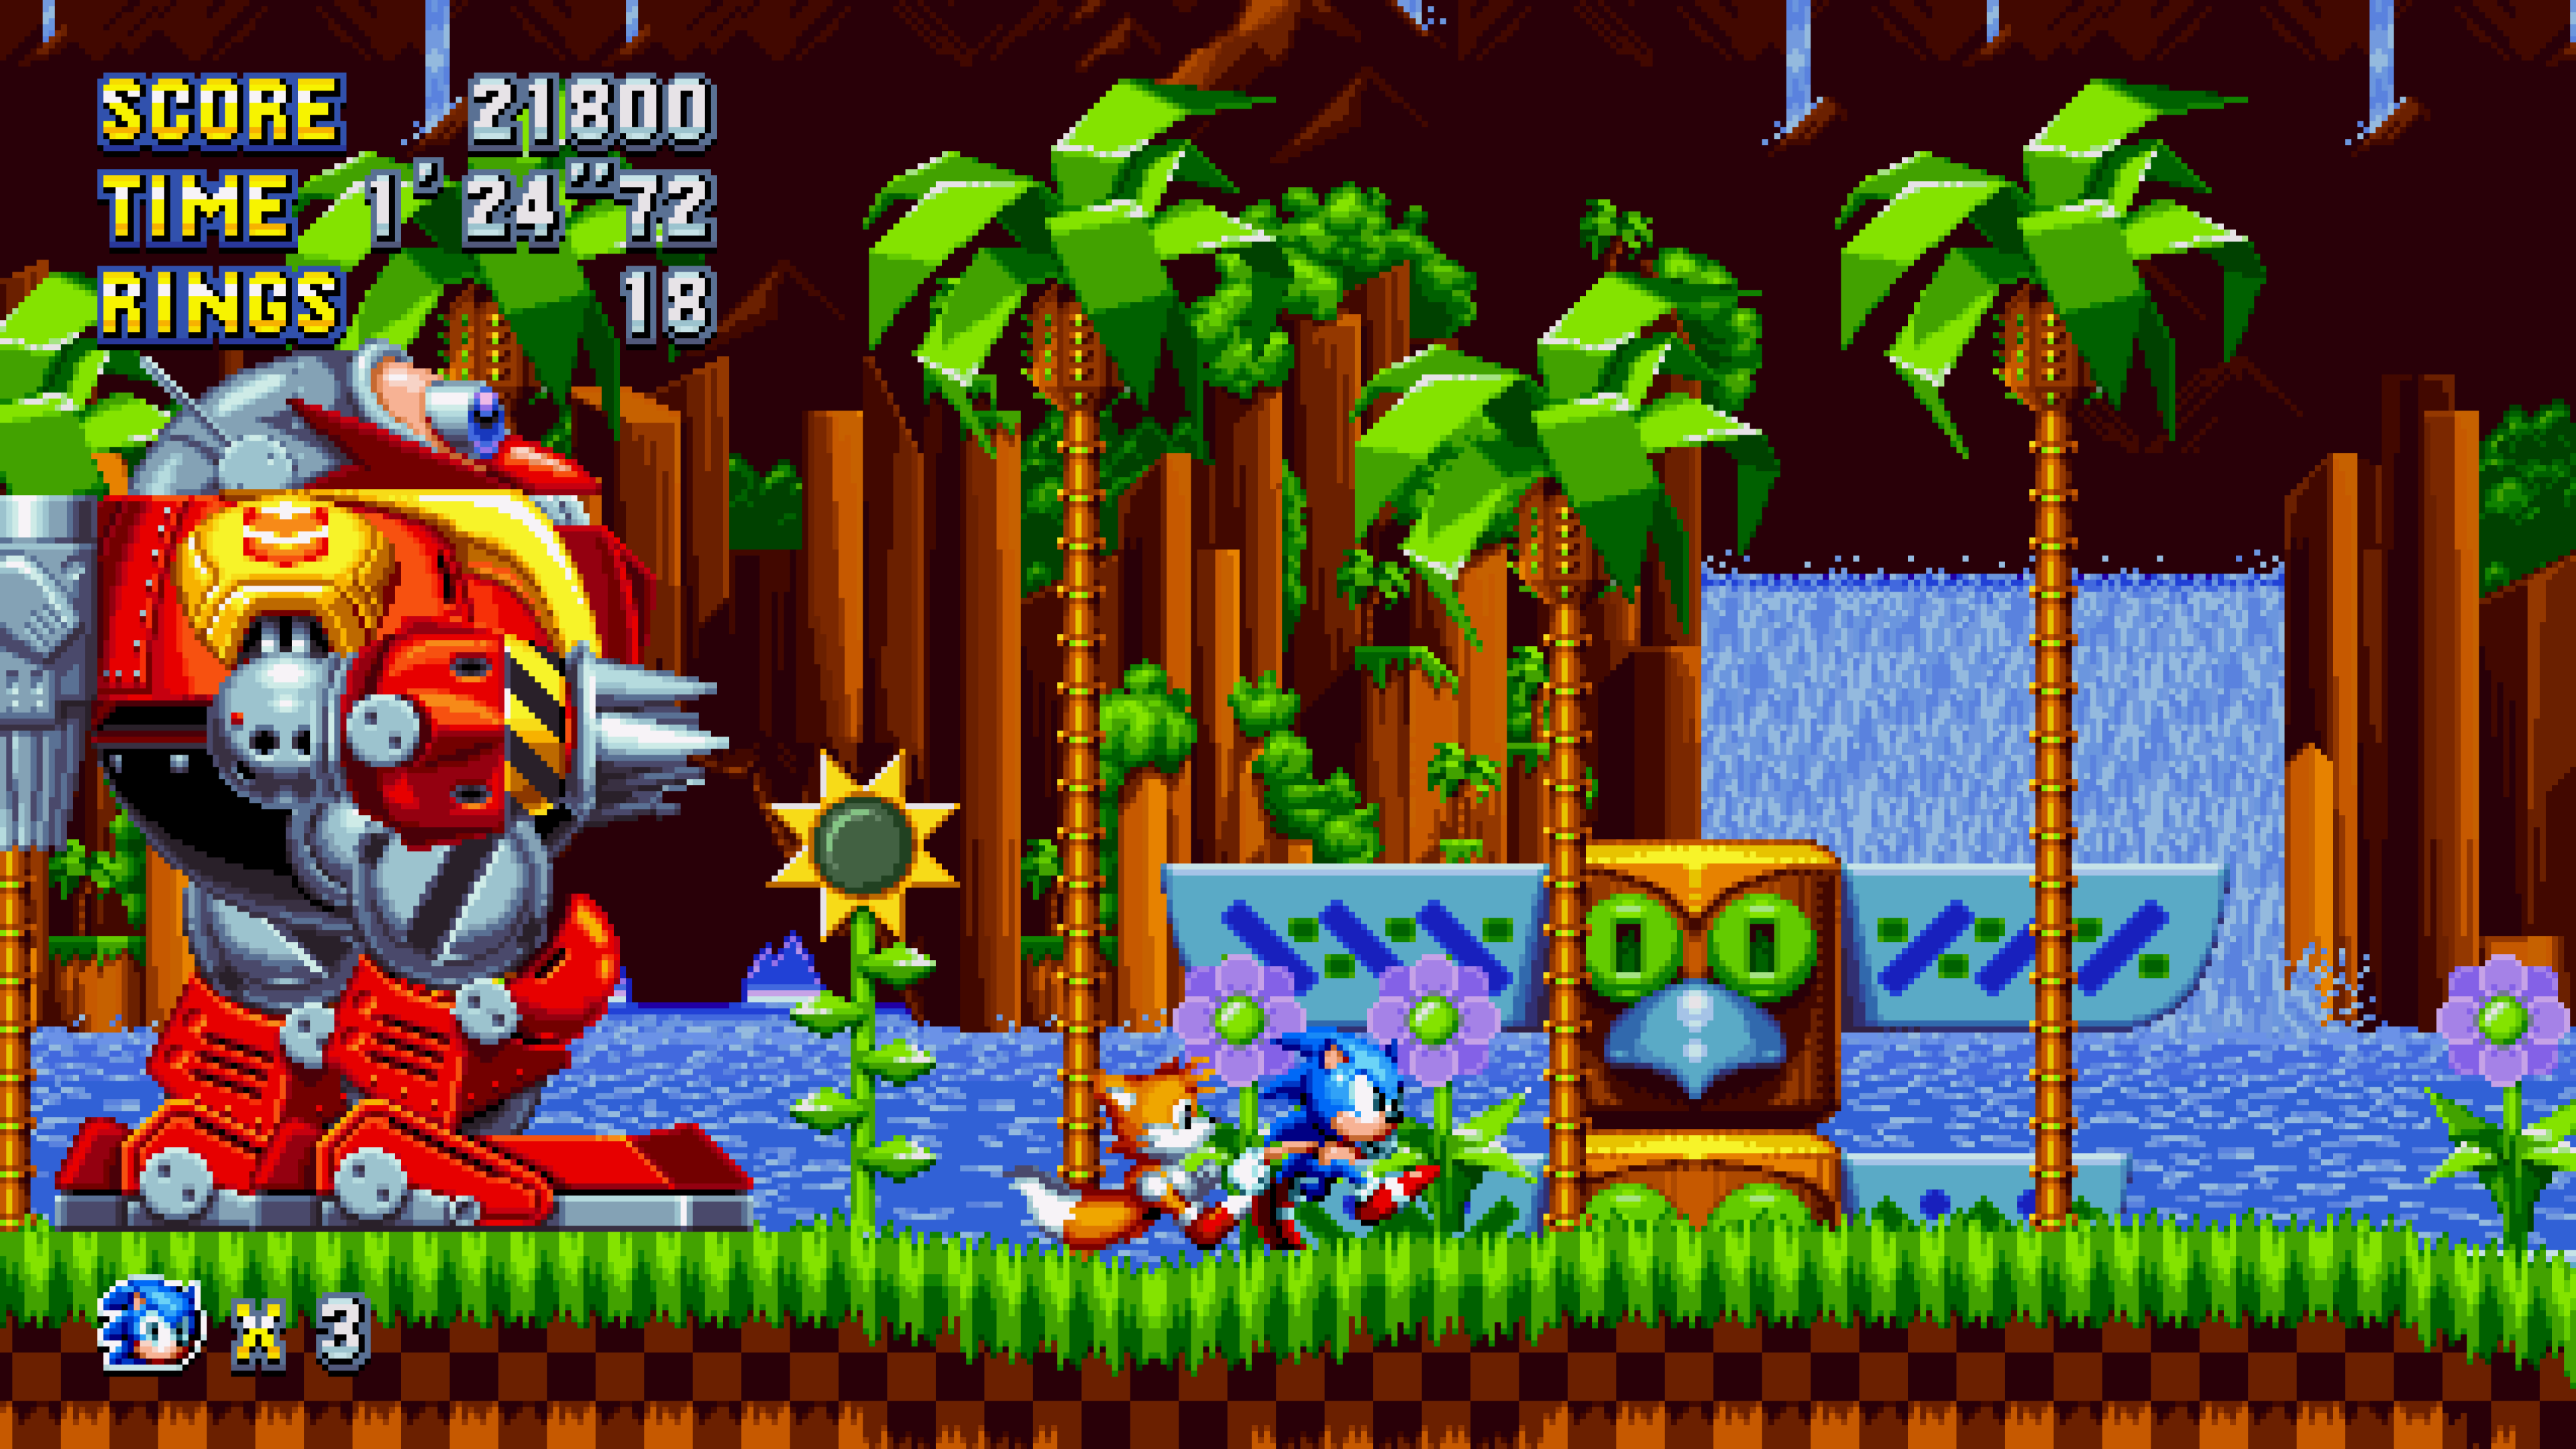 Sonic in Sonic Mania.